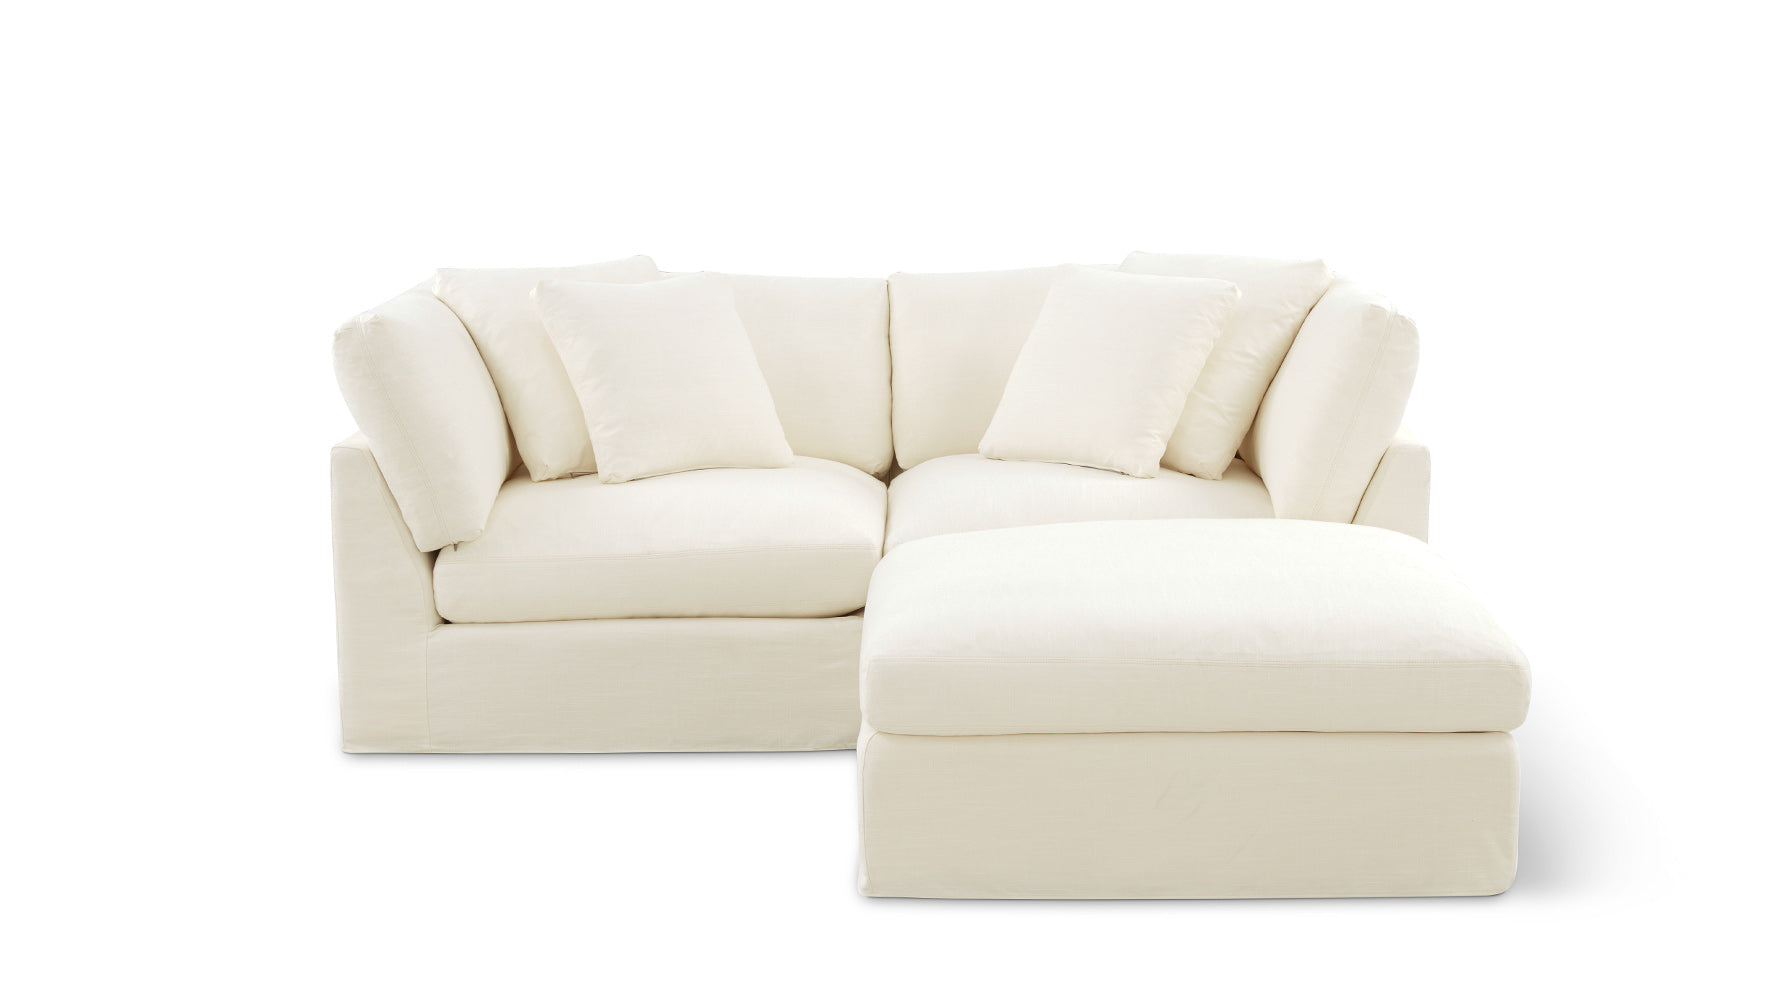 Get Together™ 3-Piece Modular Sectional, Large, Cream Linen - Image 1